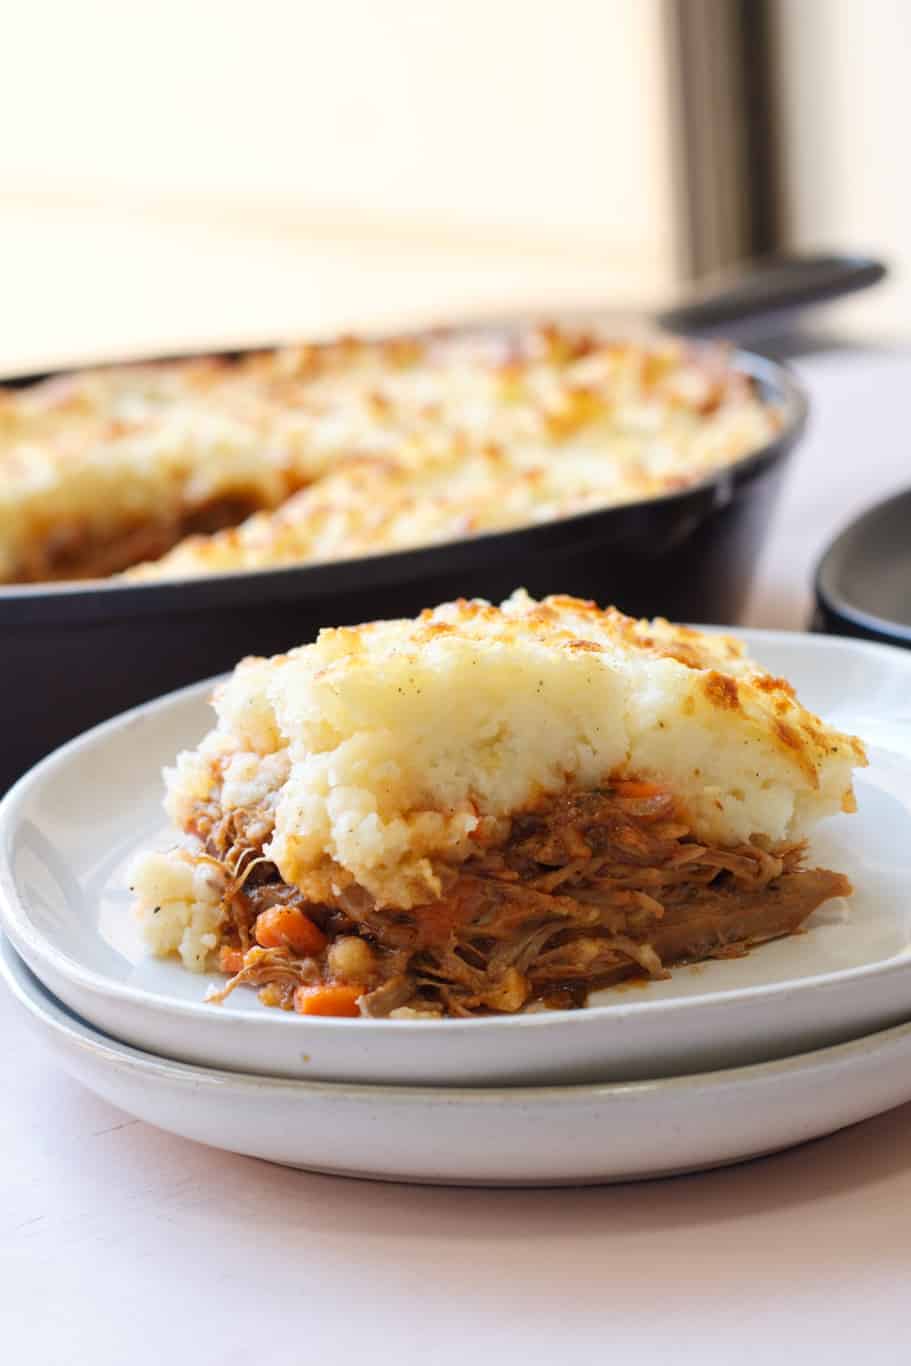 Leftover Roast Lamb Shepherd’s Pie made with leftover roast lamb, broth, veggies, and buttery mash. Pure comfort food!